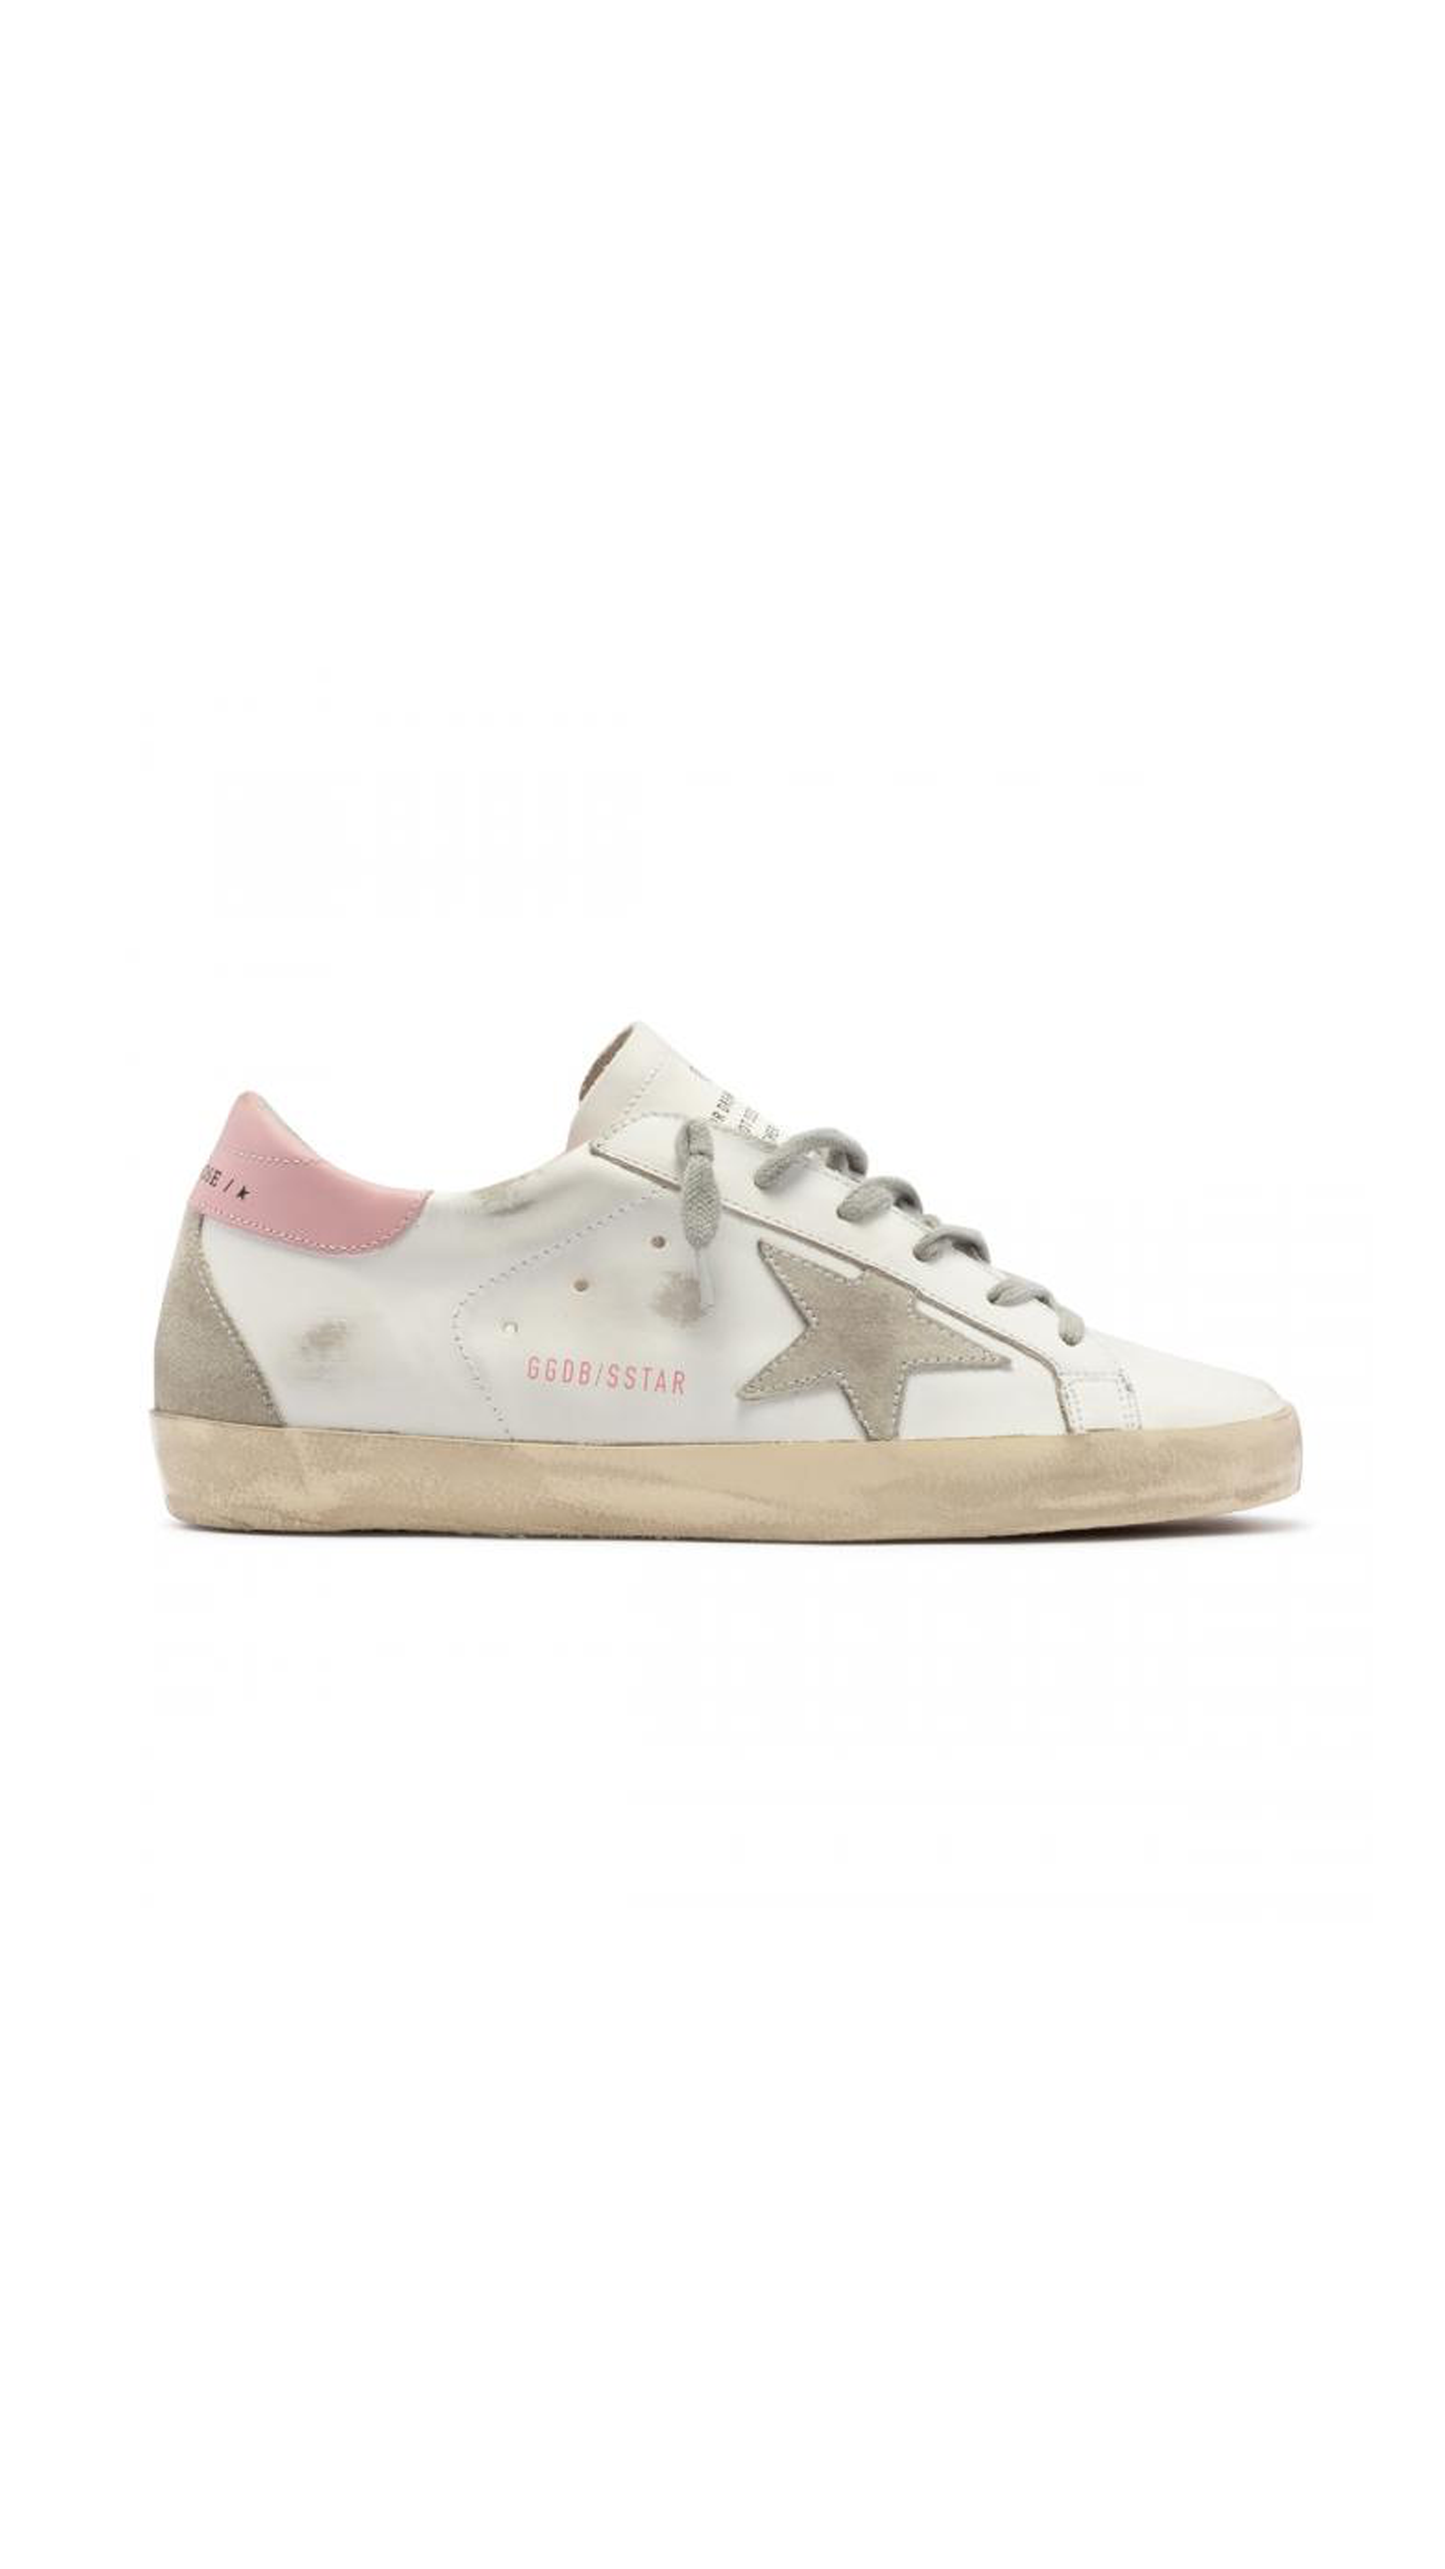 Superstar Sneakers in Leather and Suede - White / Pink